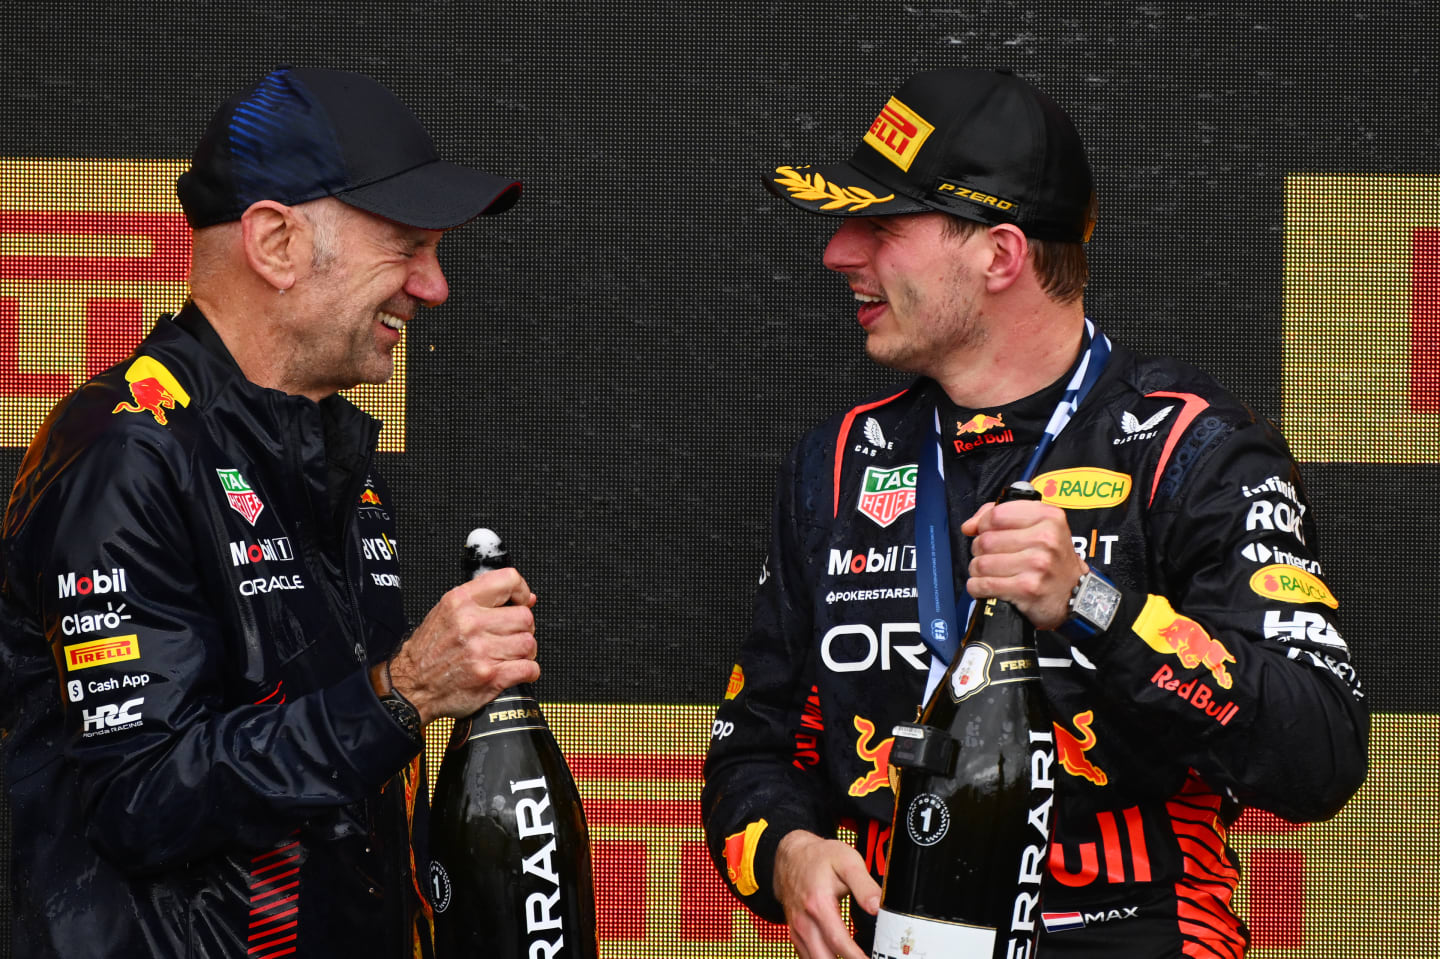 MONTREAL, QUEBEC - JUNE 18: Adrian Newey, the Chief Technical Officer of Red Bull Racing and First